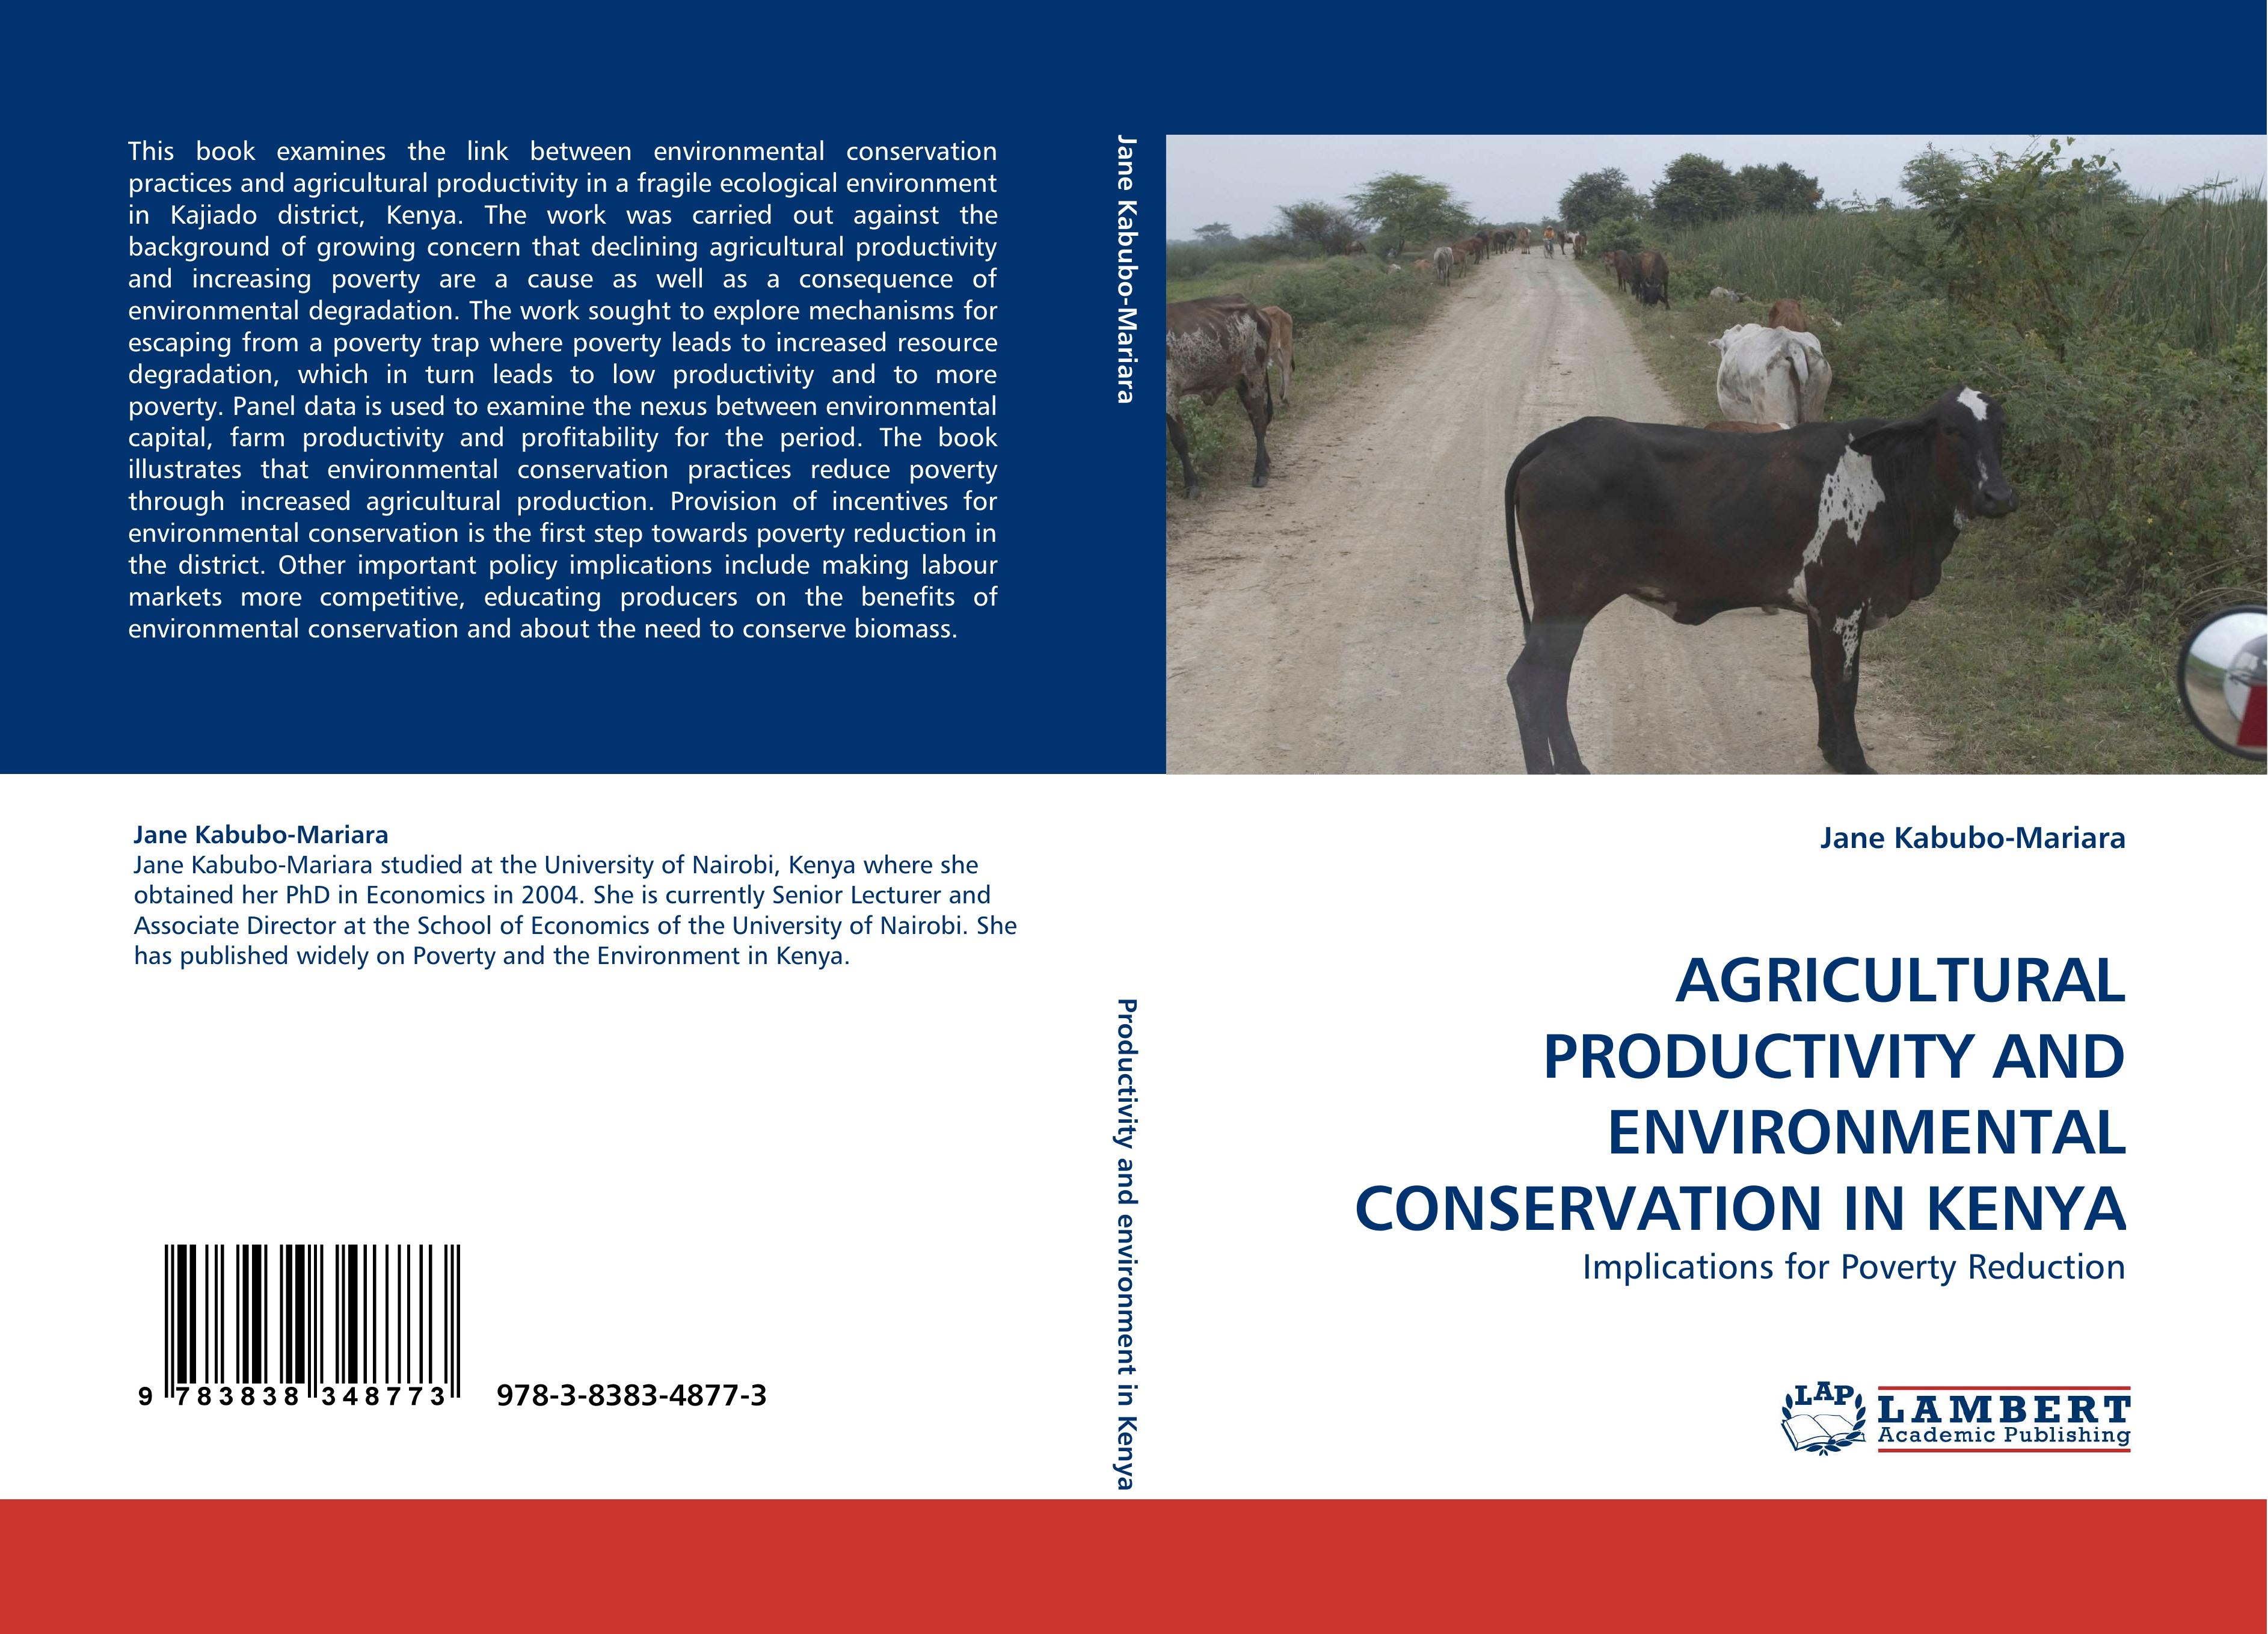 AGRICULTURAL PRODUCTIVITY AND ENVIRONMENTAL CONSERVATION IN KENYA / Implications for Poverty Reduction / Jane Kabubo-Mariara / Taschenbuch / Paperback / 152 S. / Englisch / 2010 / EAN 9783838348773 - Kabubo-Mariara, Jane